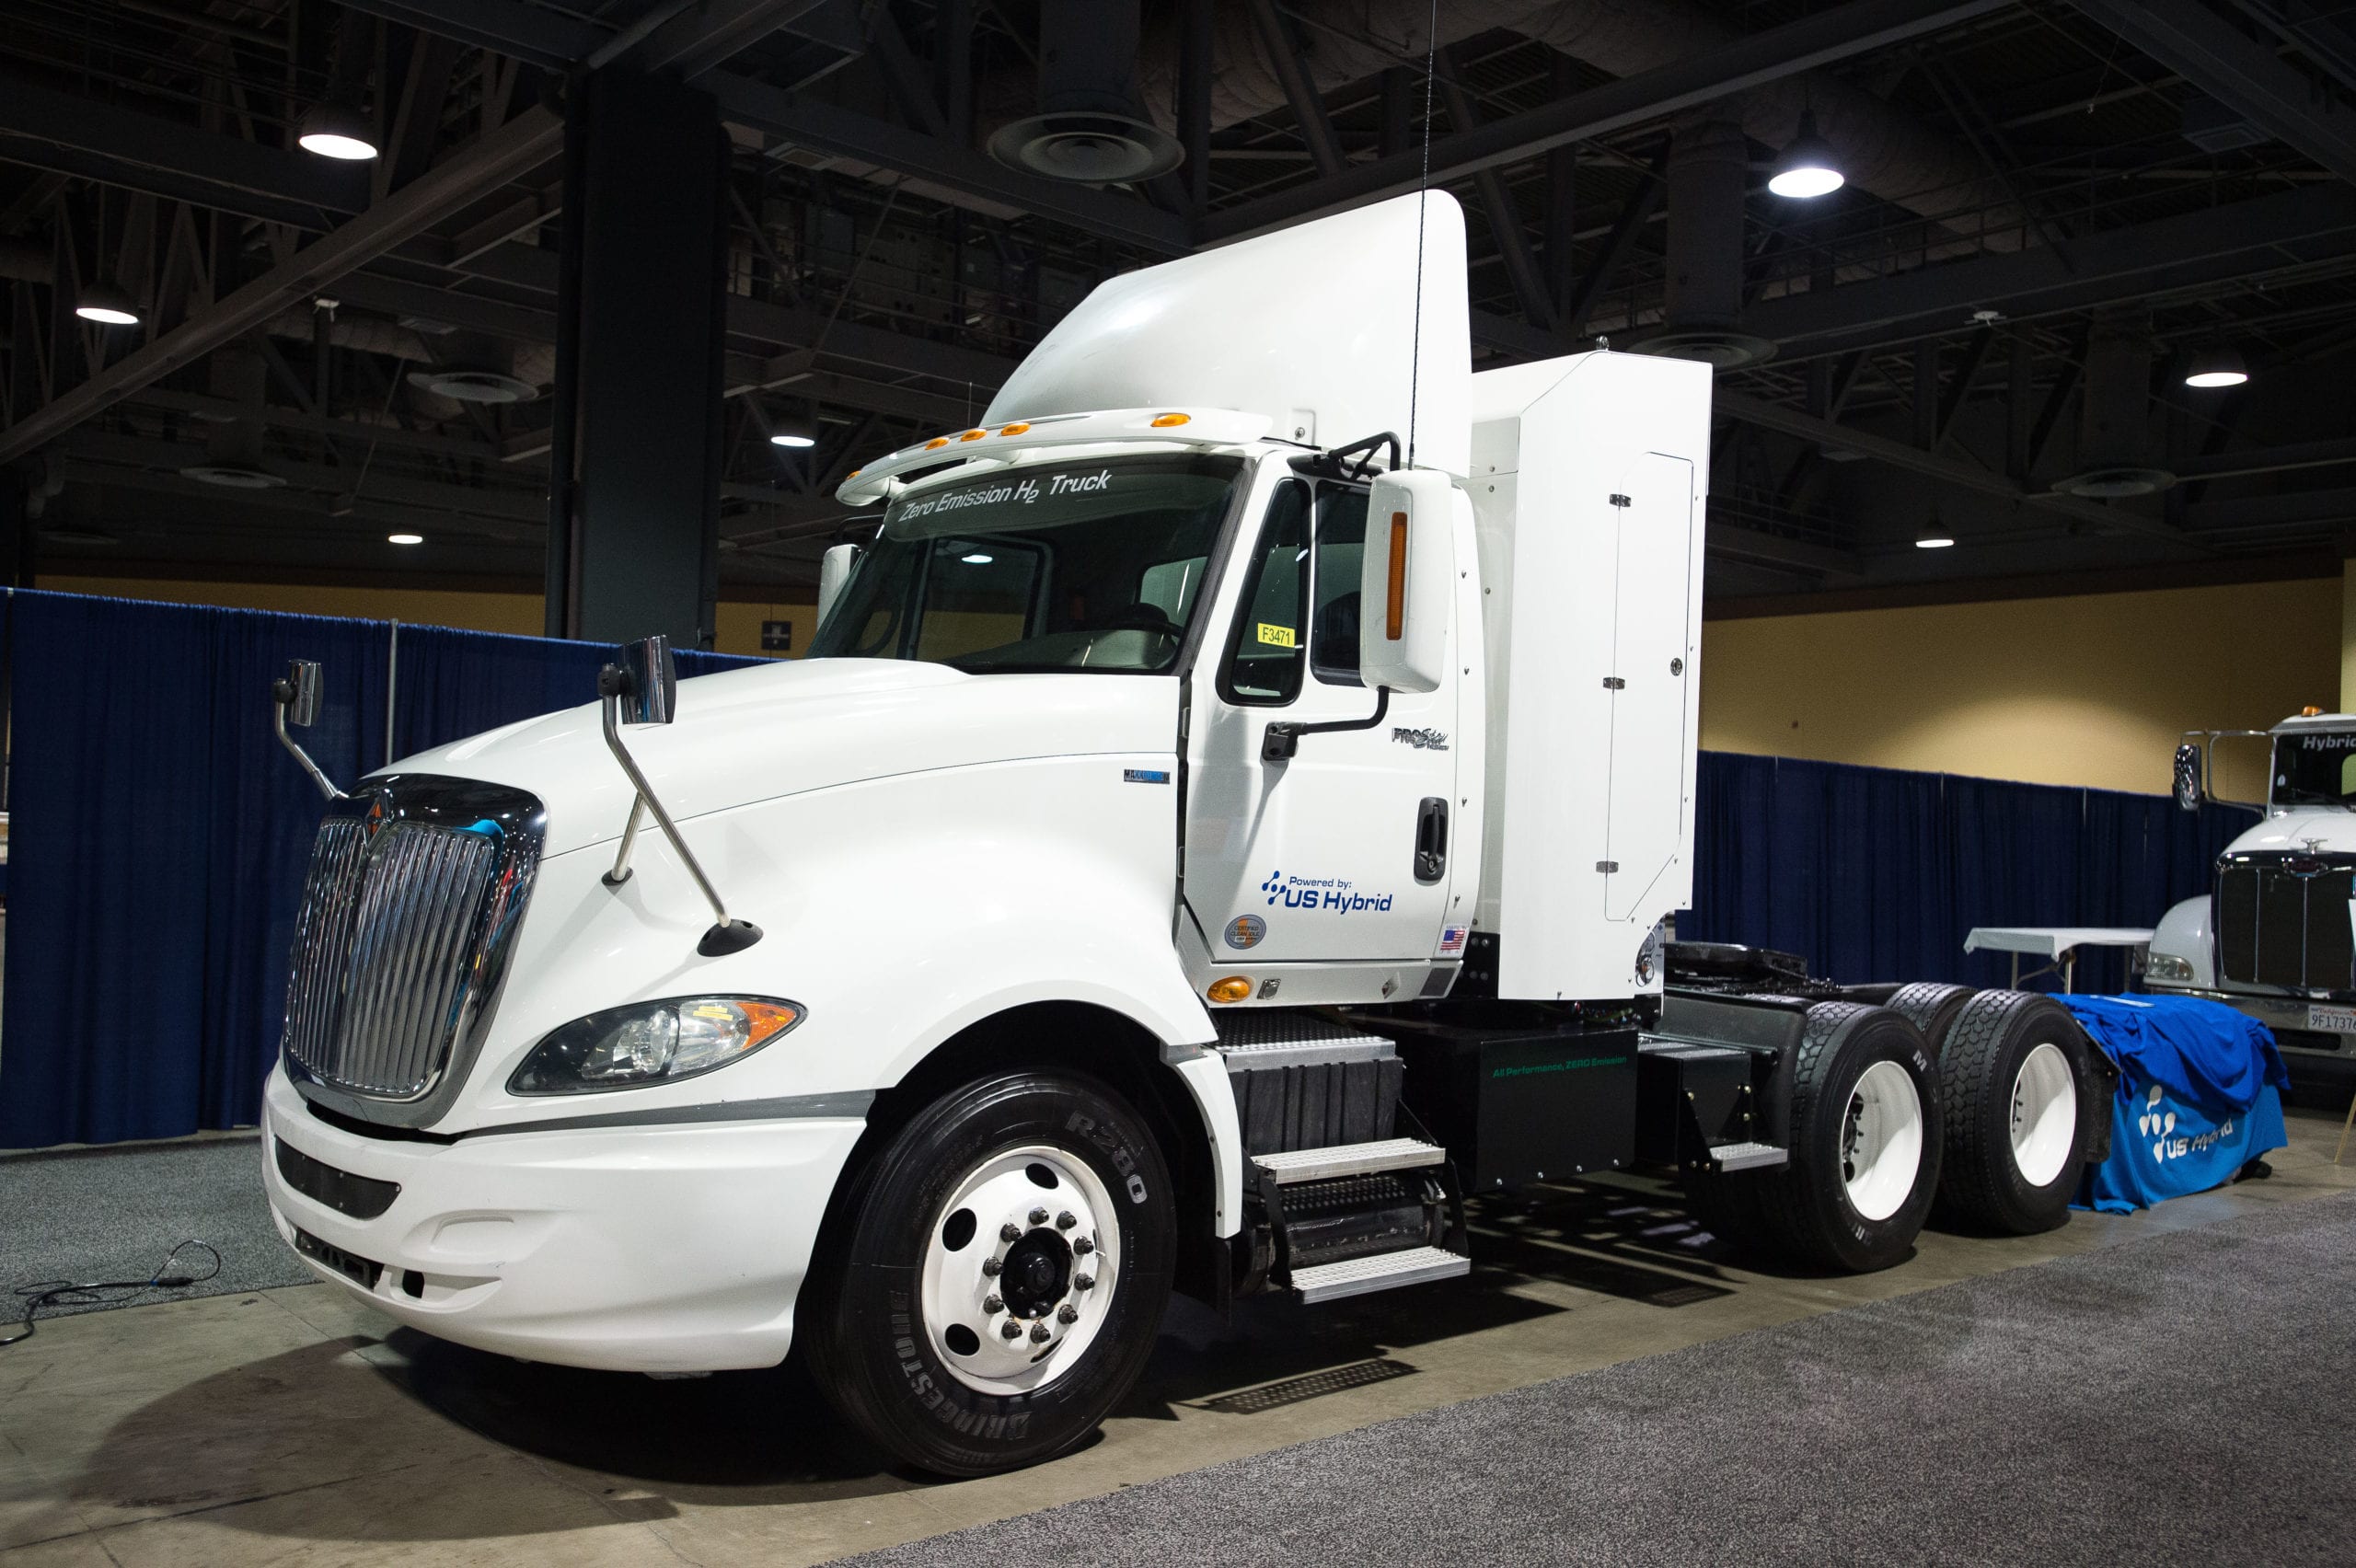 hydrogen fuel cell truck at ACT Expo